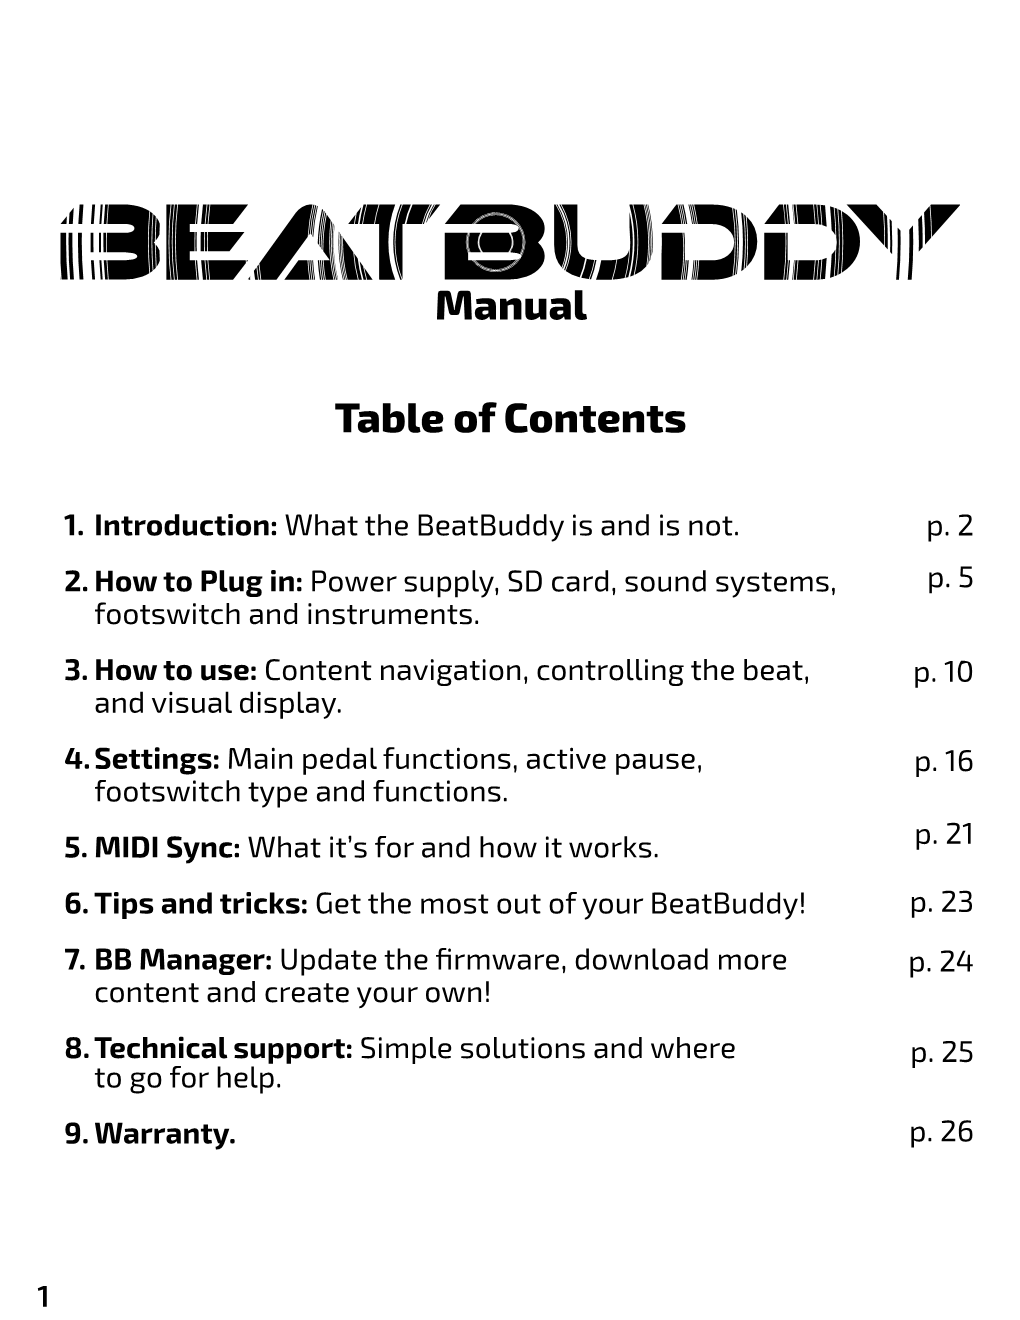 Manual Table of Contents